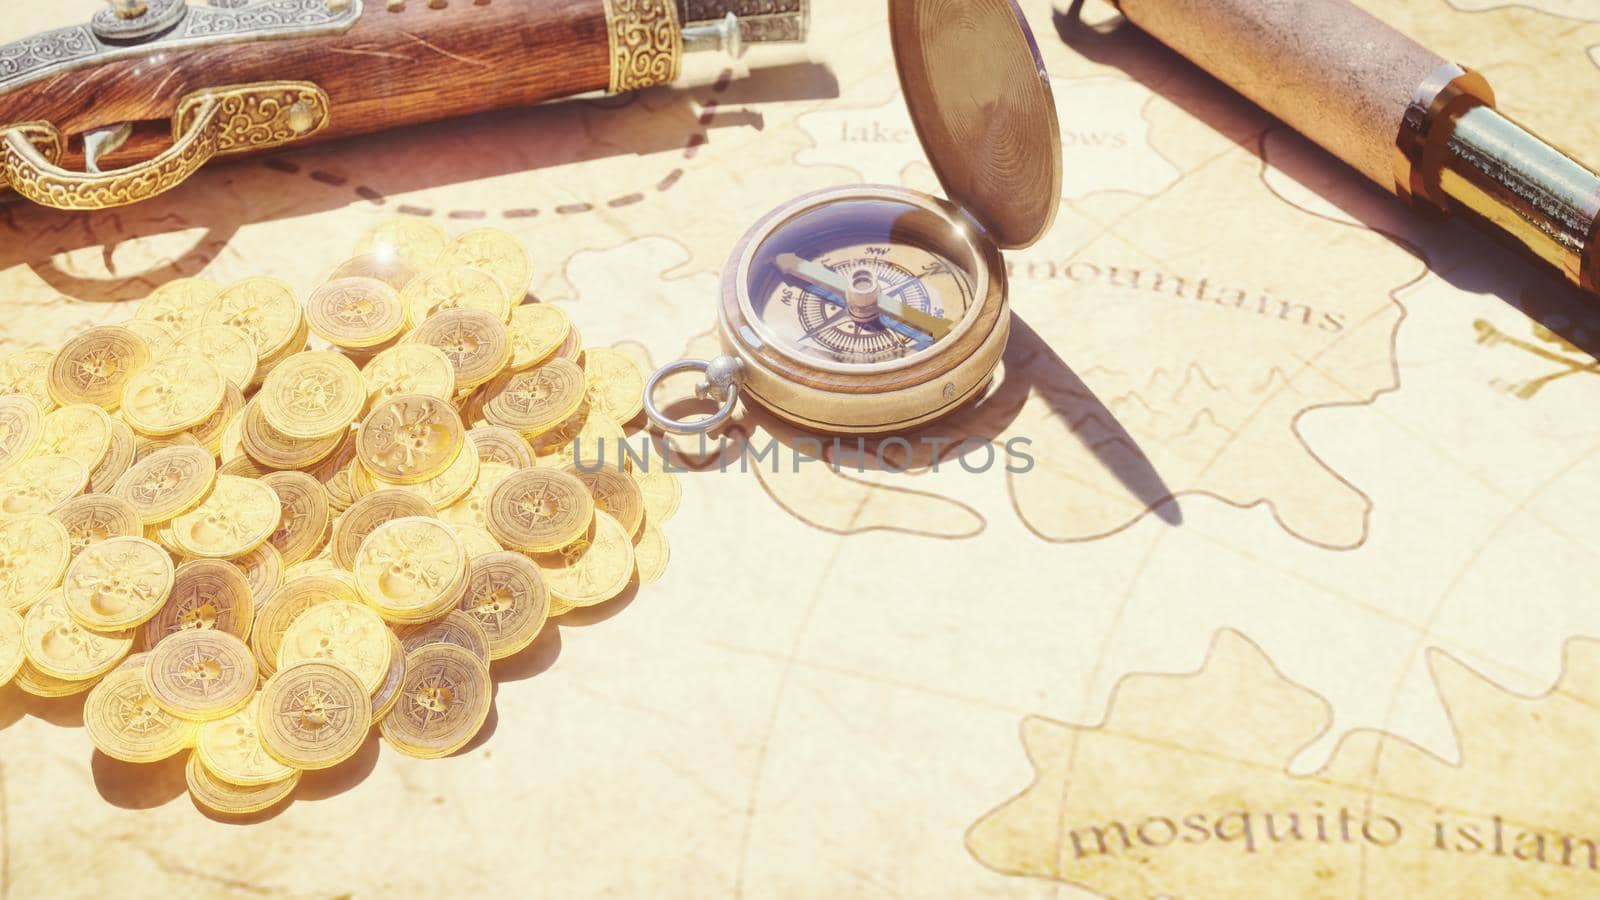 Pirate compass with pistol and spyglass lie on the treasure map. Pirate treasure and old pirate map on pirate island. 3D Rendering by designprojects